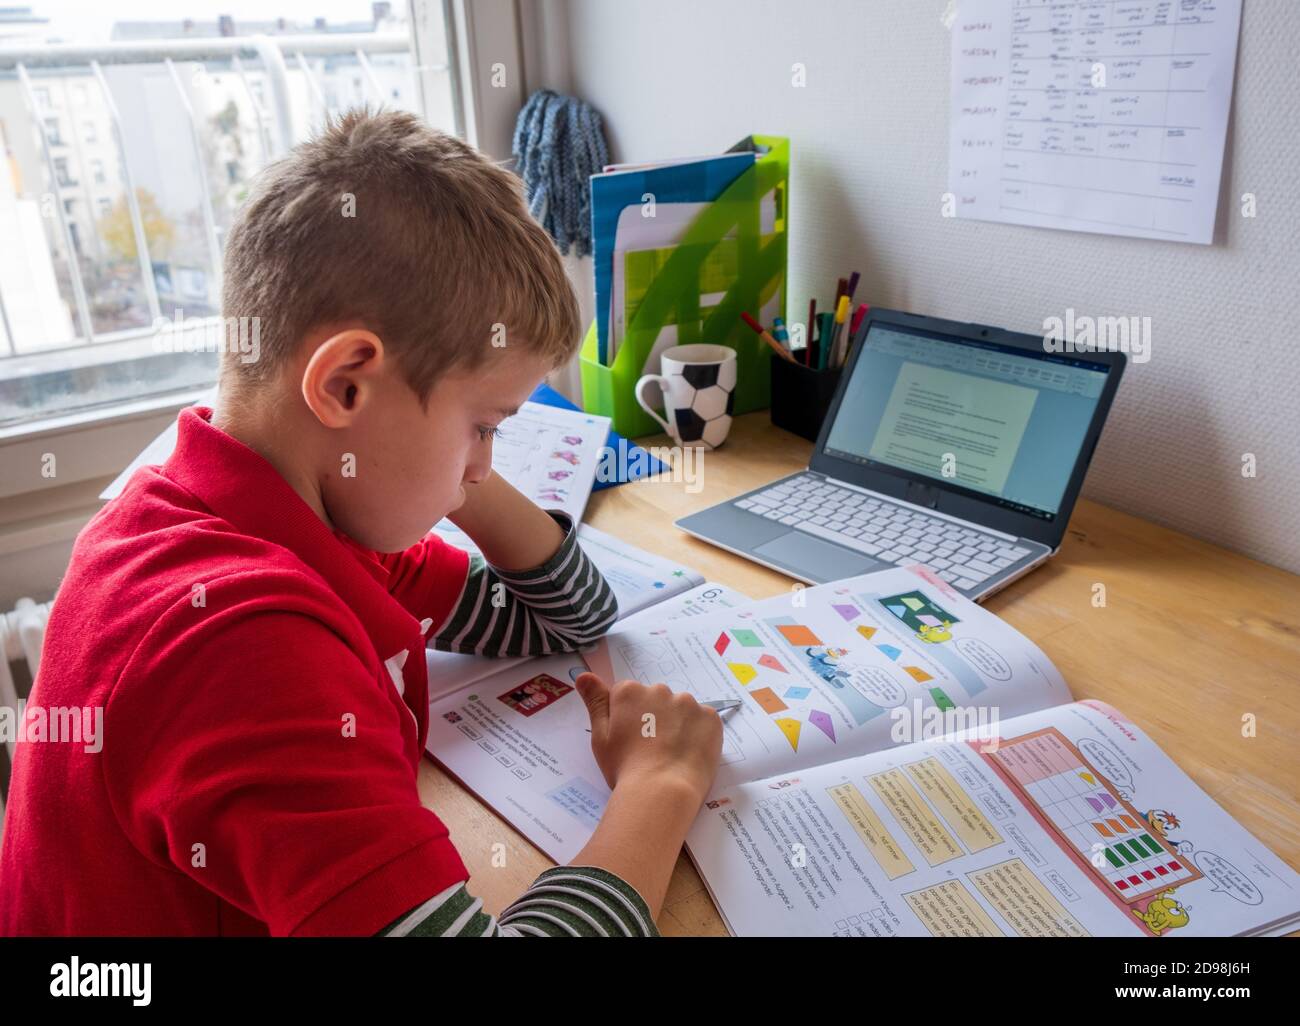 Boy concentrating during homeschooling in corona lockdown Stock Photo